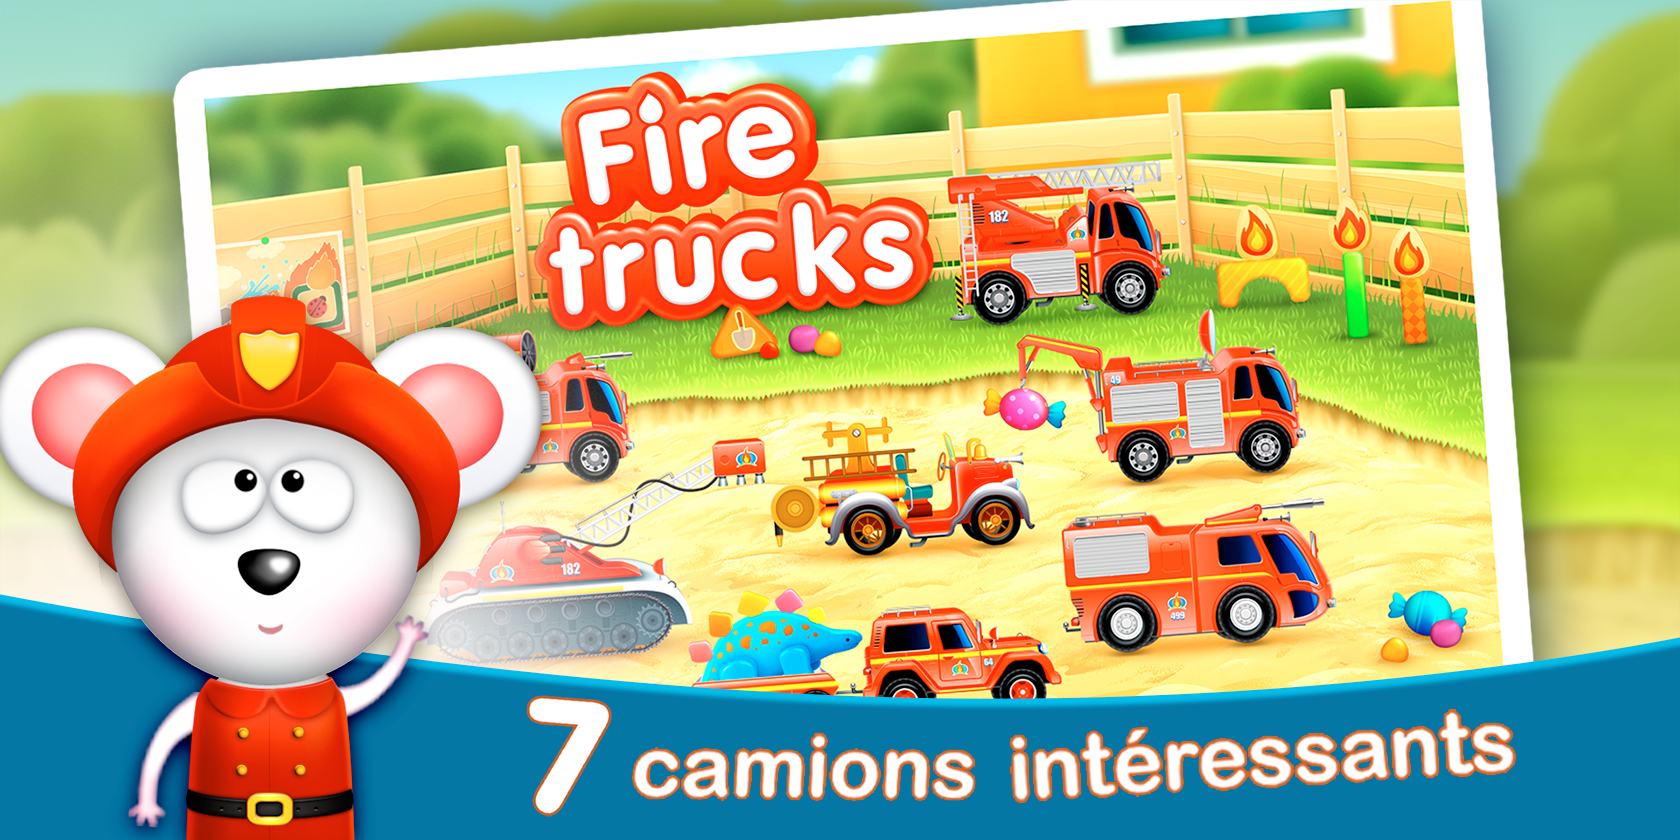 Android application Firetrucks: rescue for kids screenshort